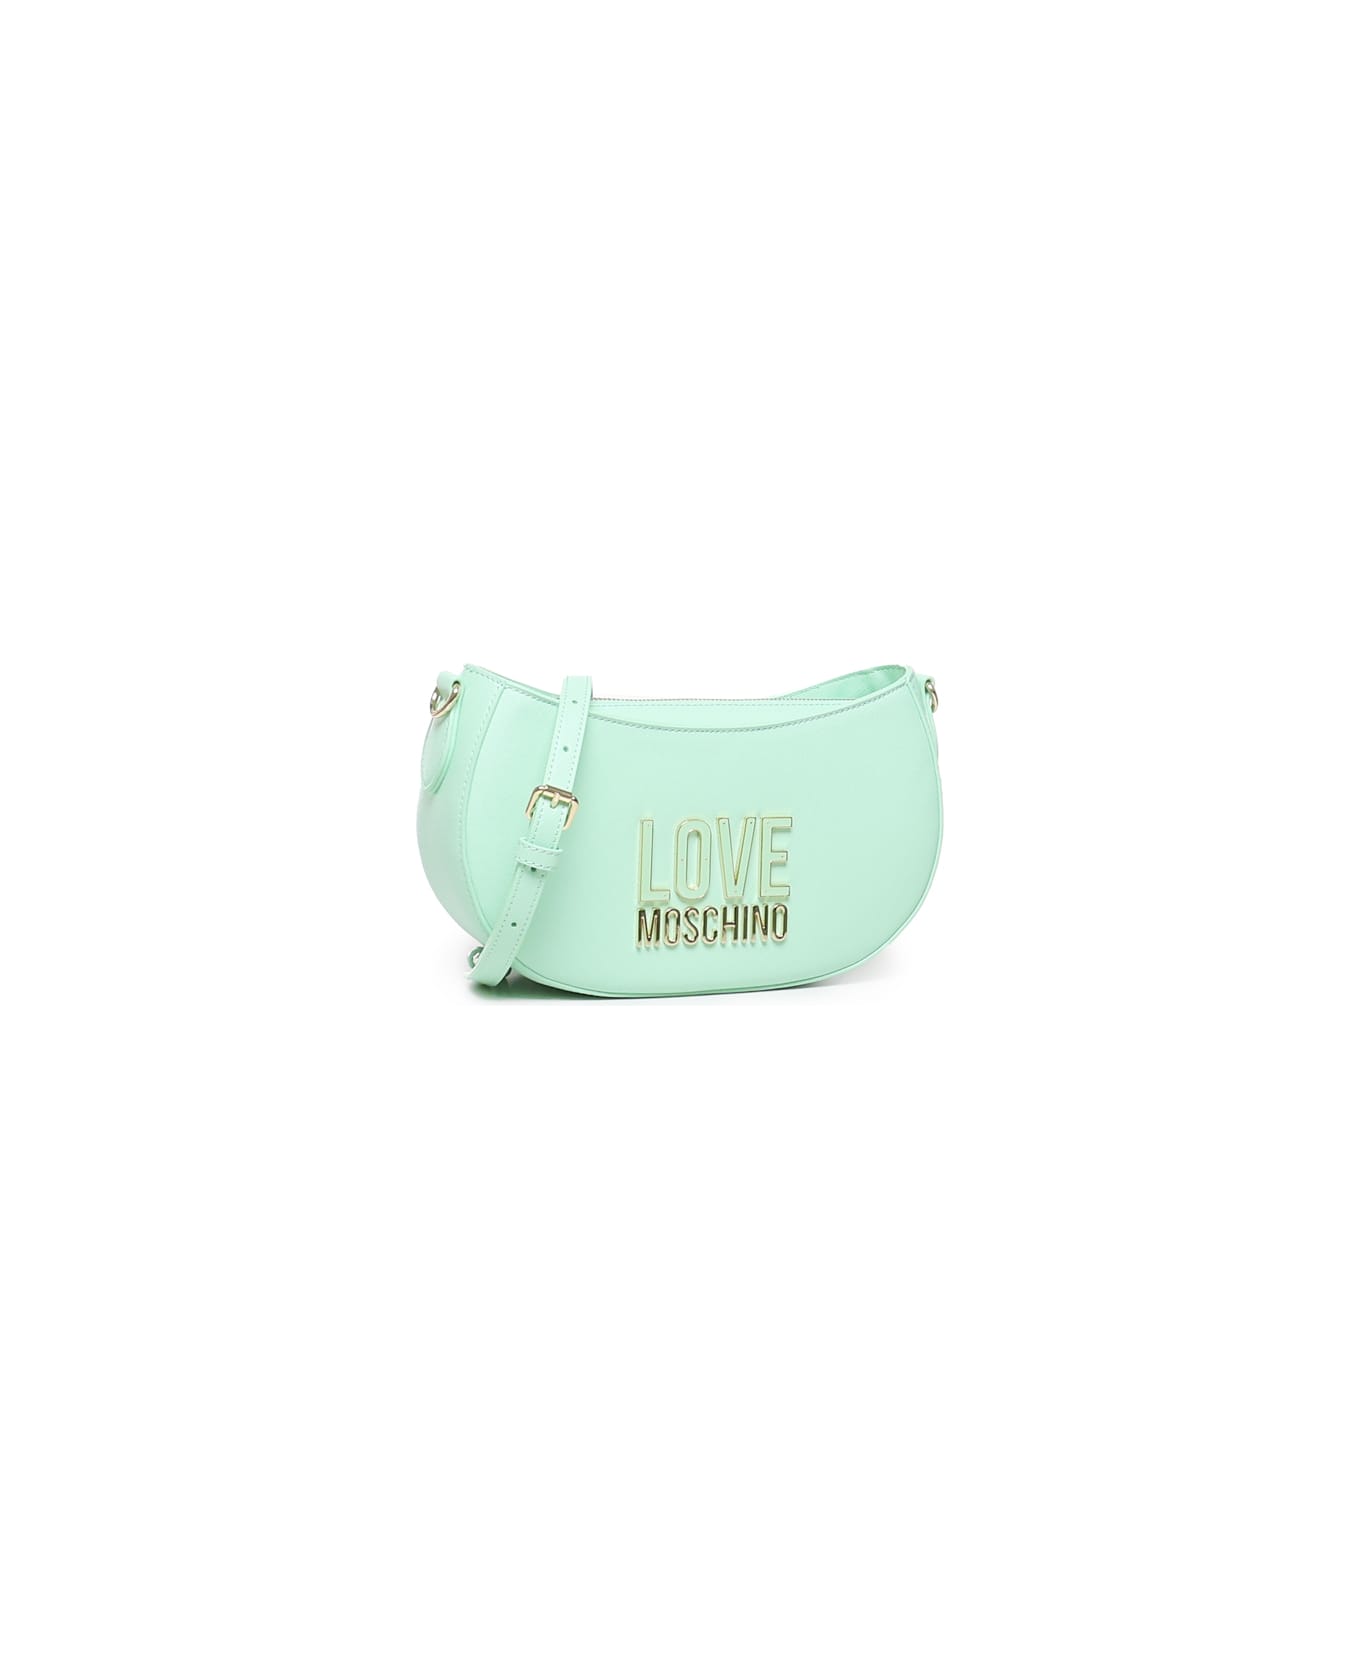 Love Moschino Jelly Shoulder Bag - Mint バッグ